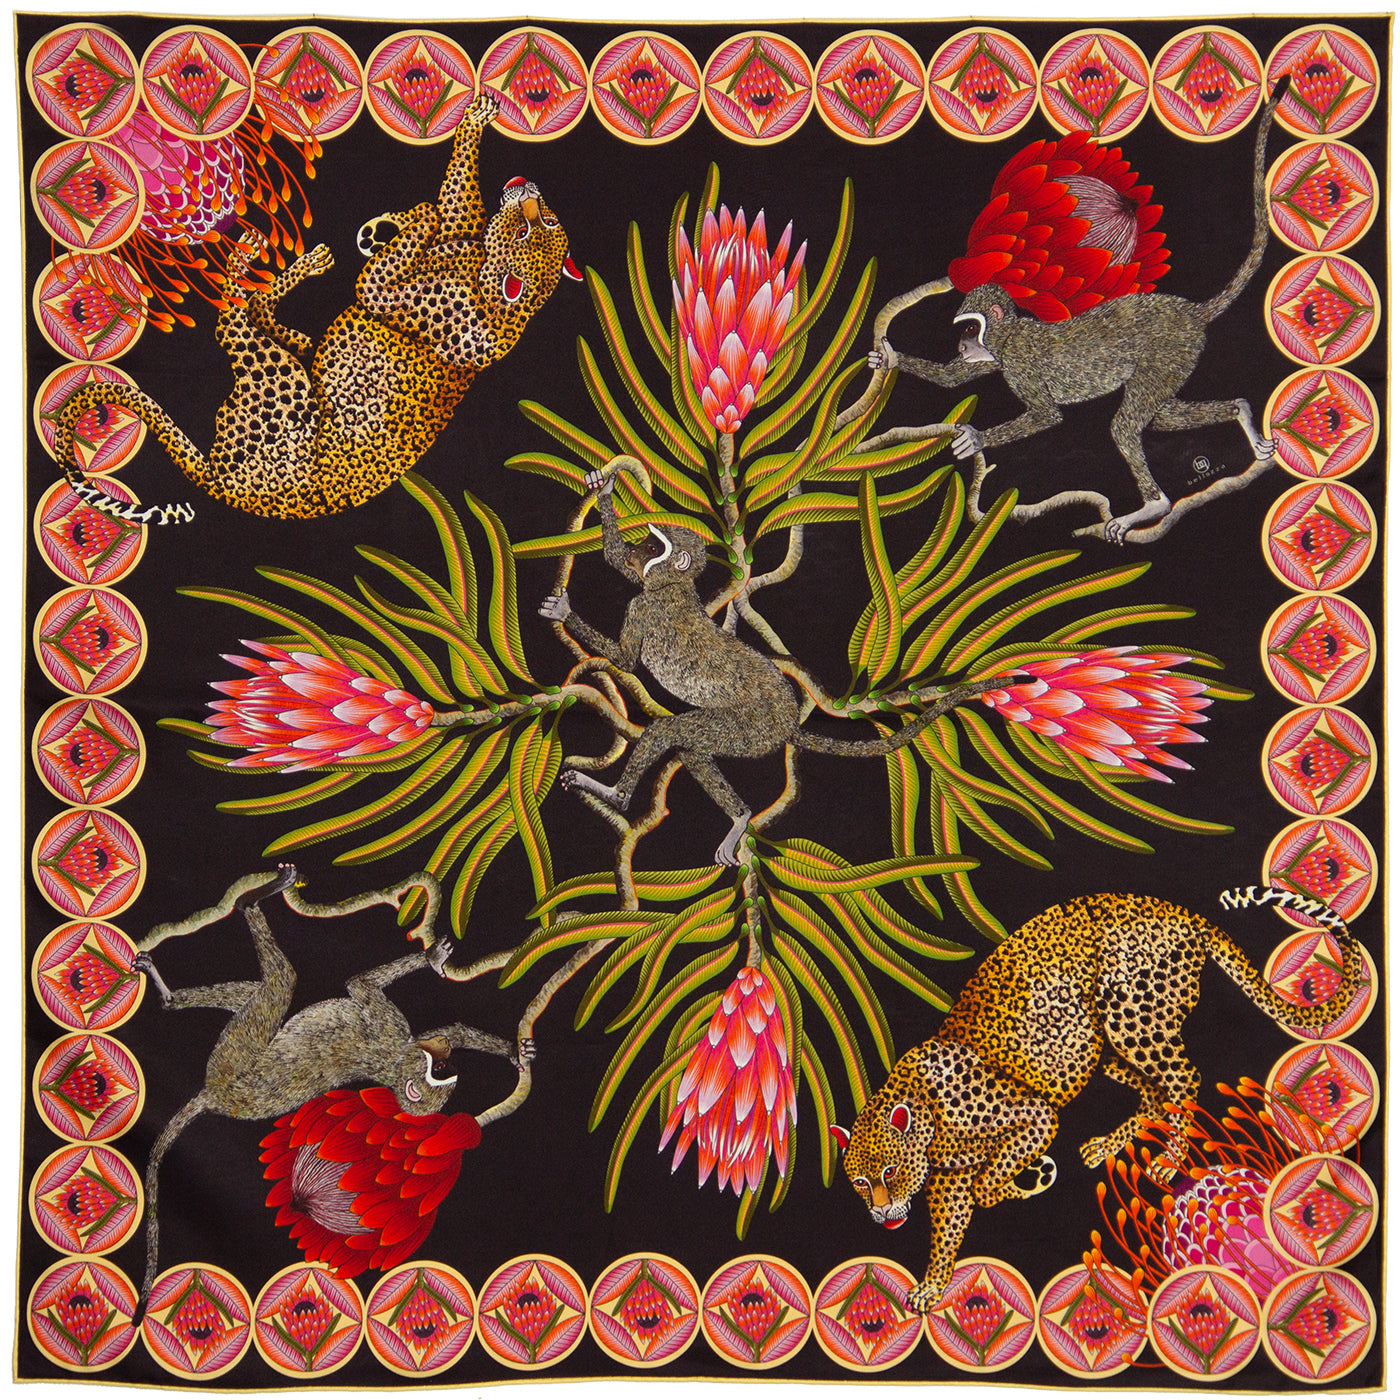 Black and olive silk scarf with Leopards & Monkeys & Protea flowers